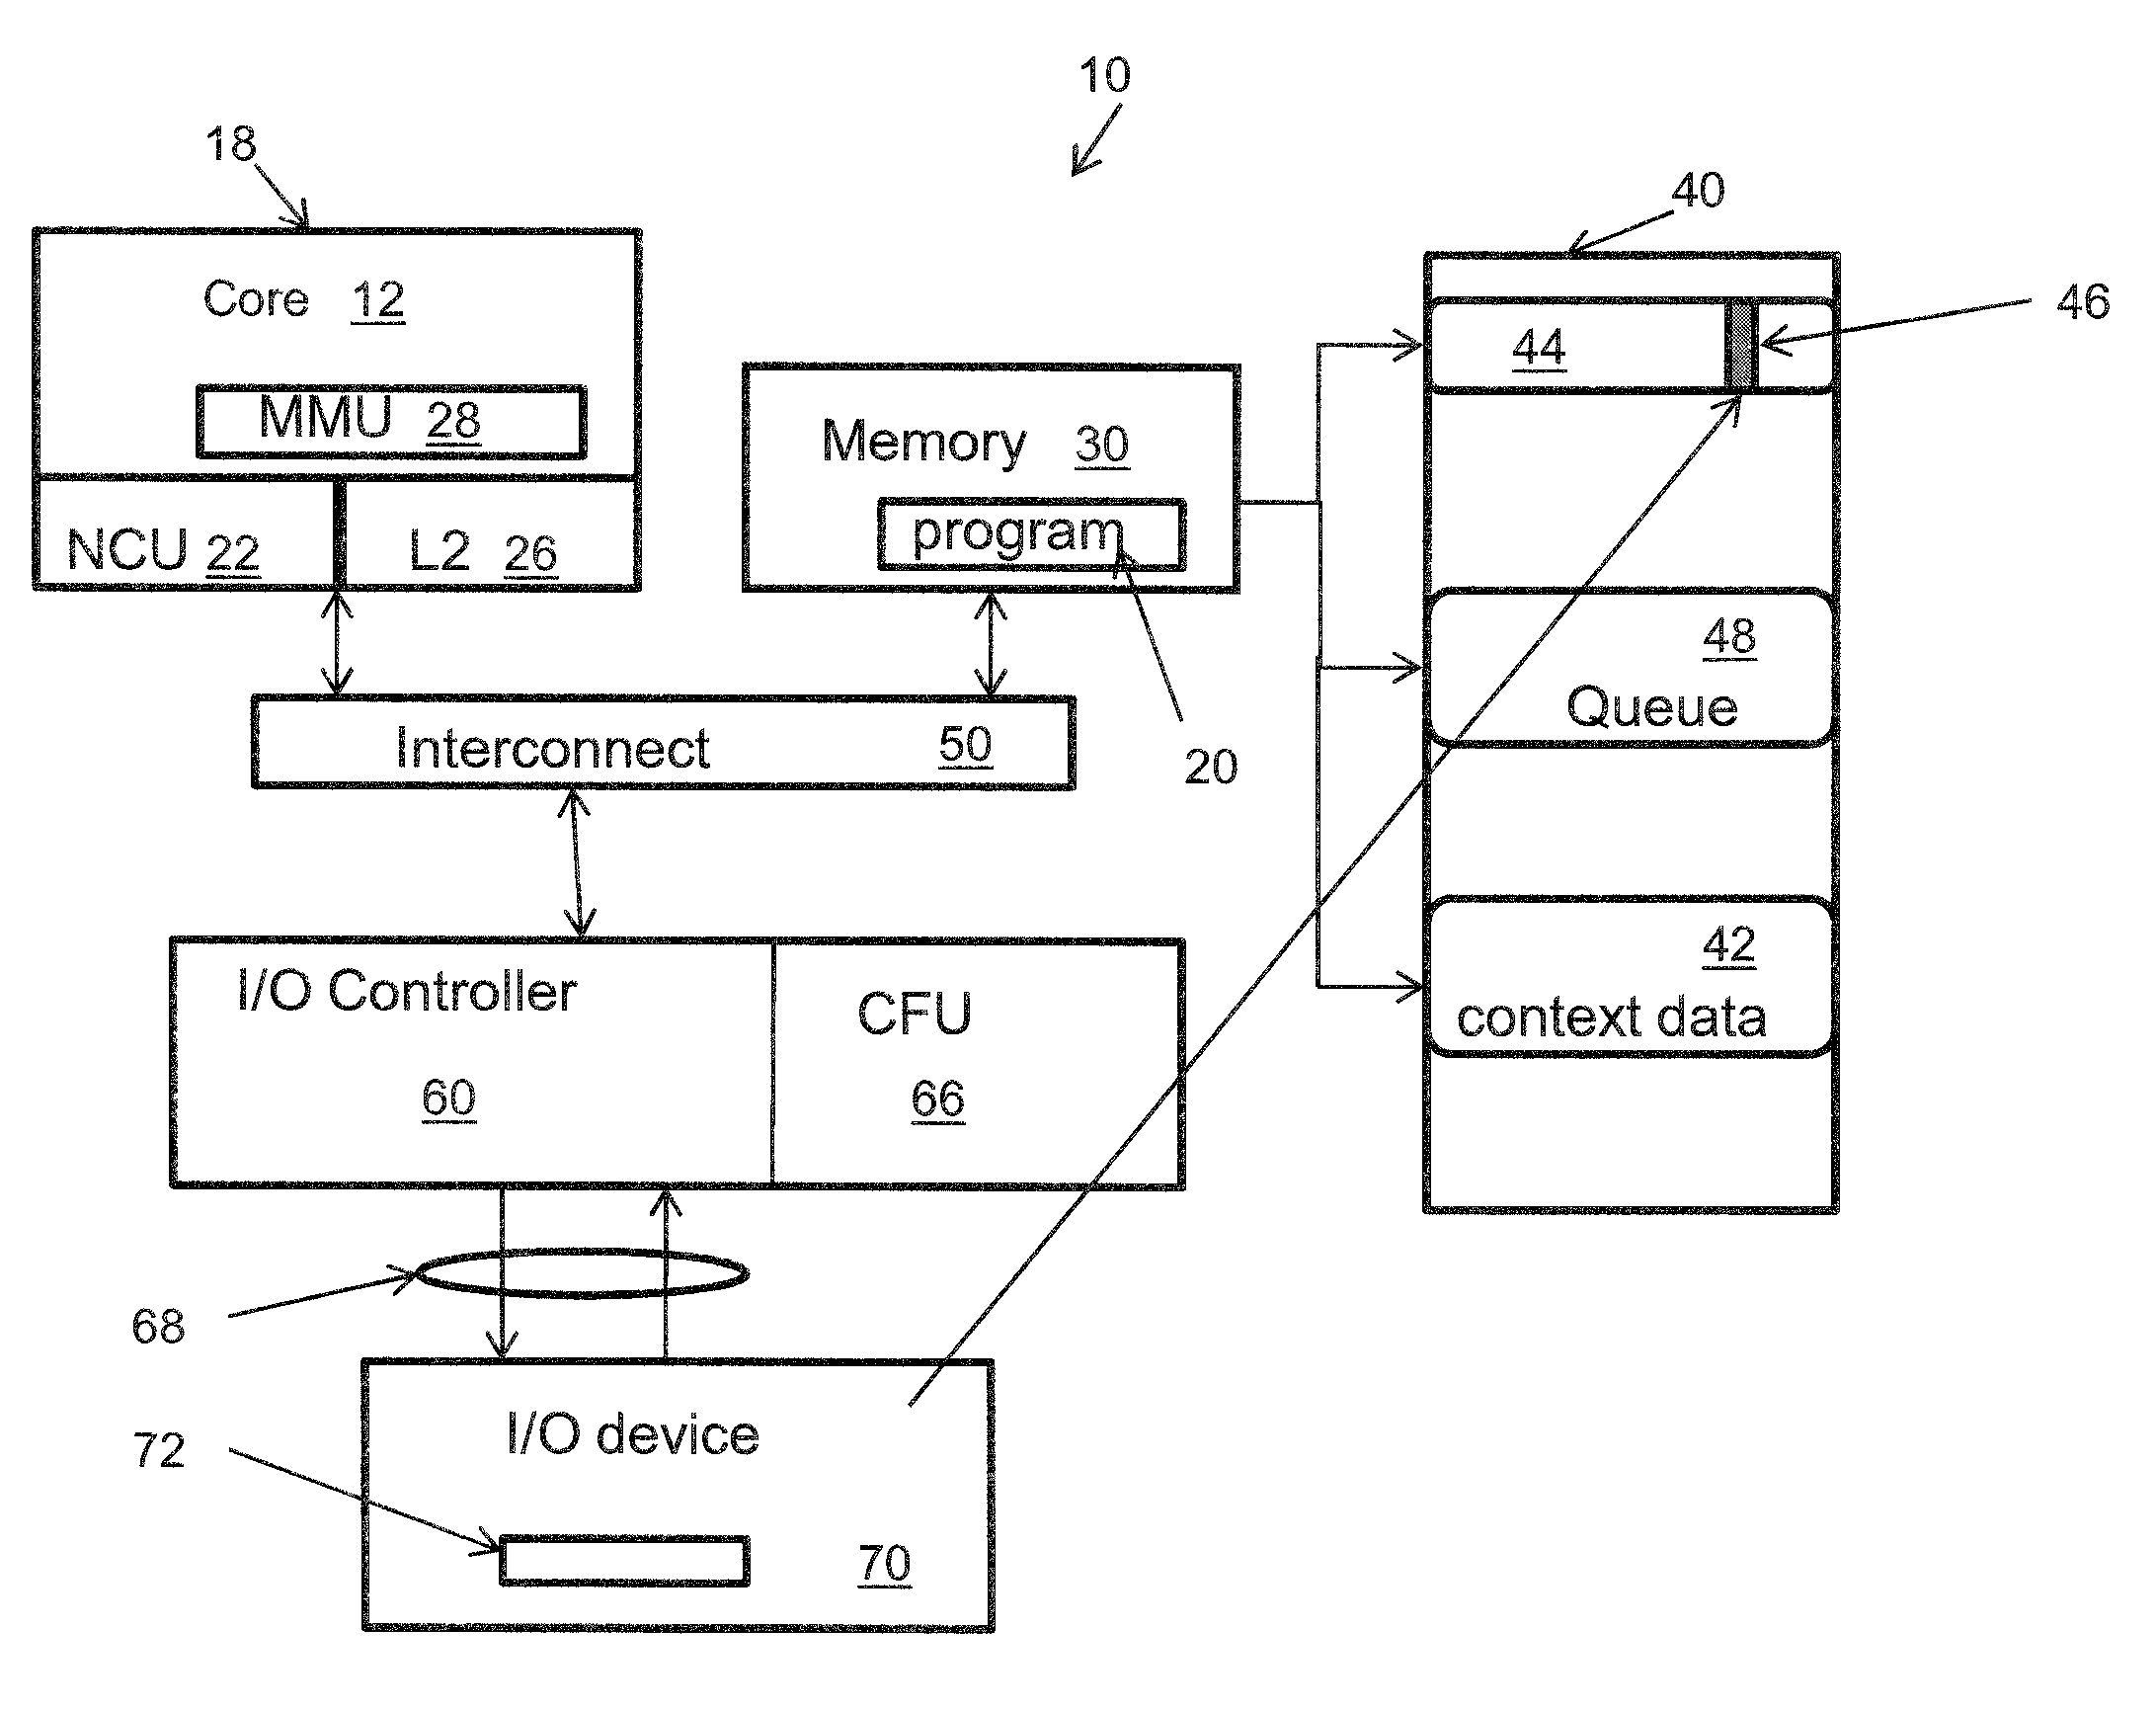 Method for pushing work request-associated contexts into an IO device